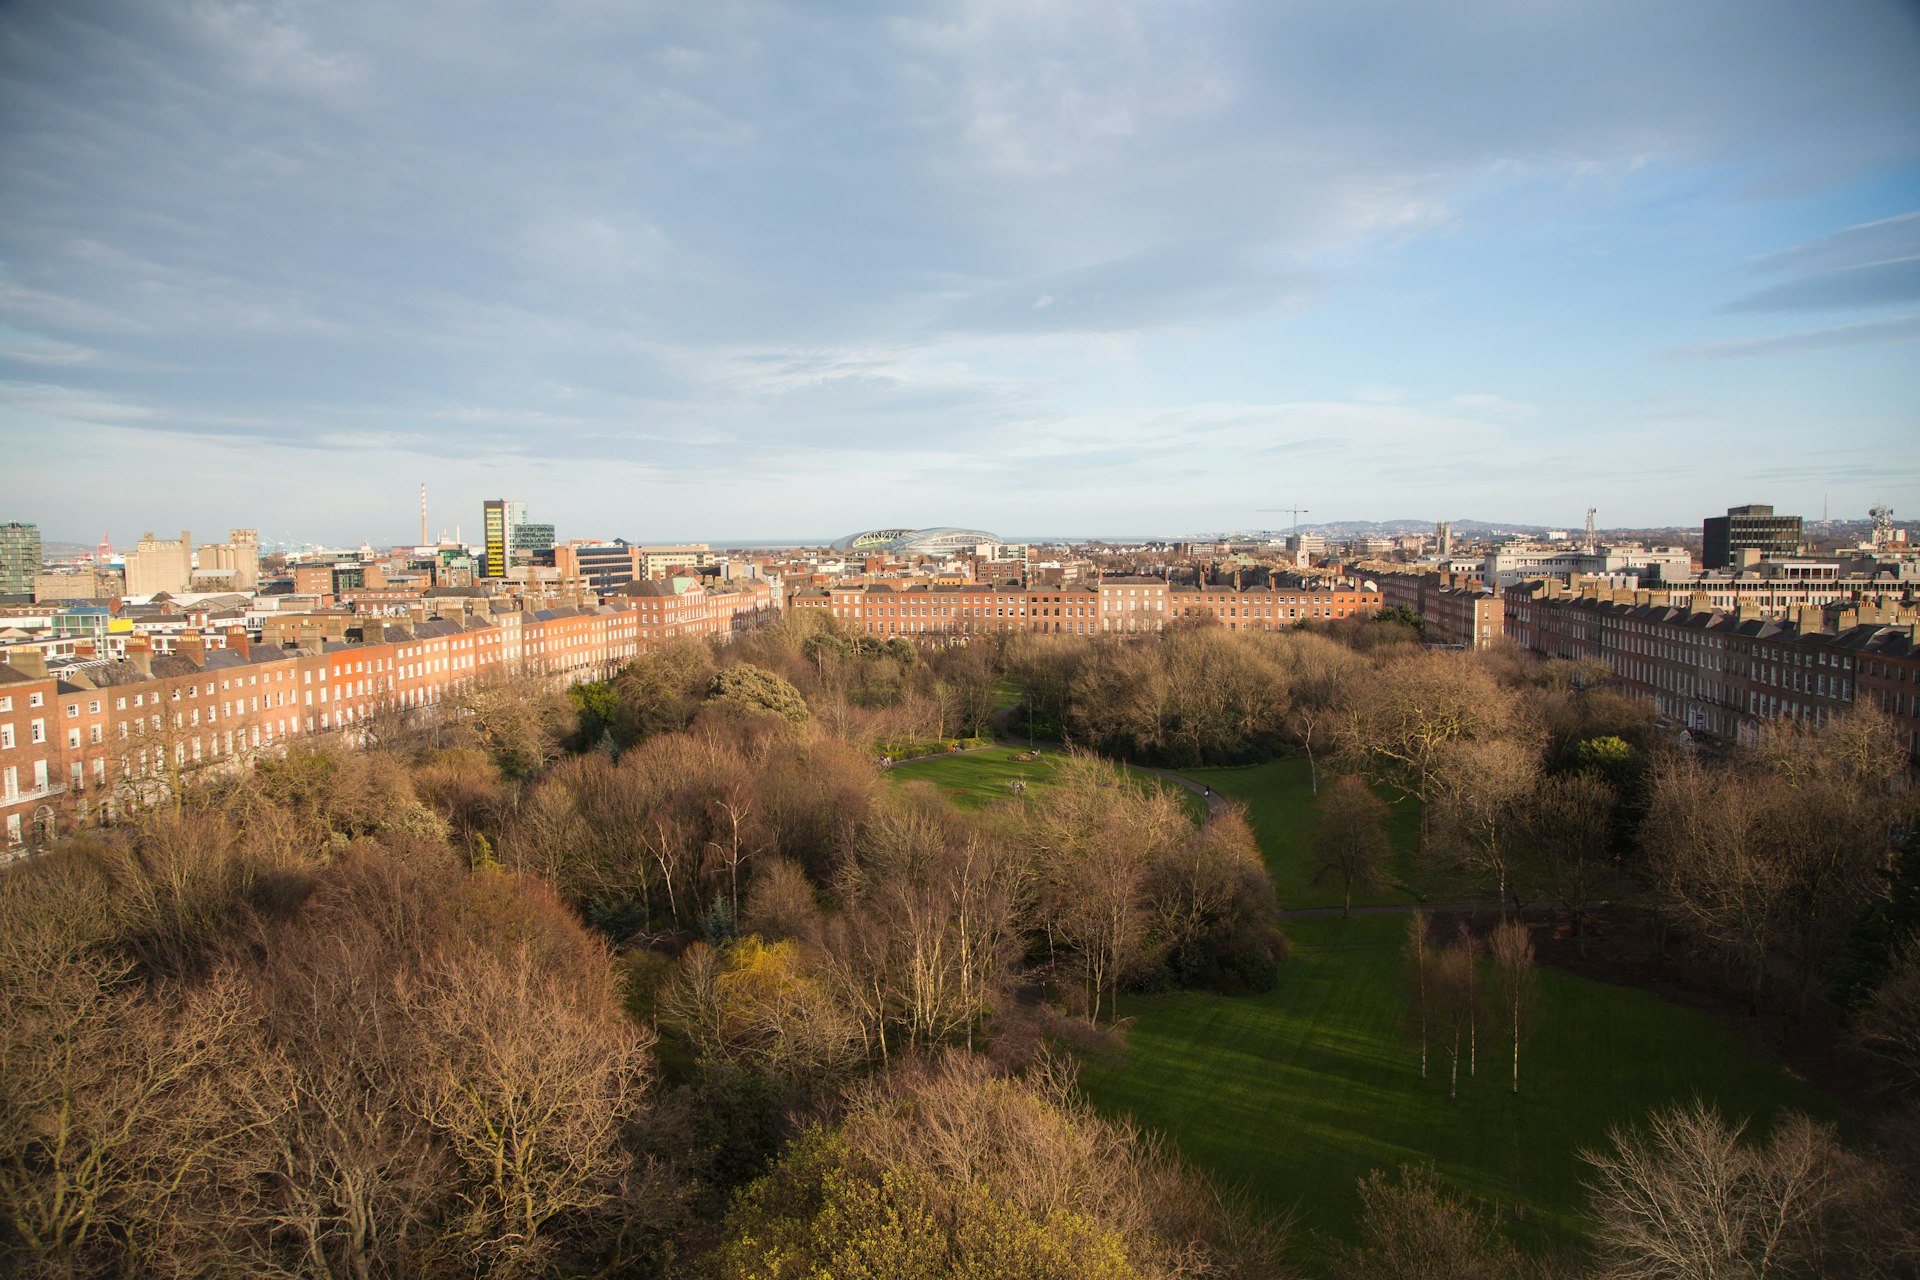 The skyline of Dublin from a viewpoint over Merrion Square